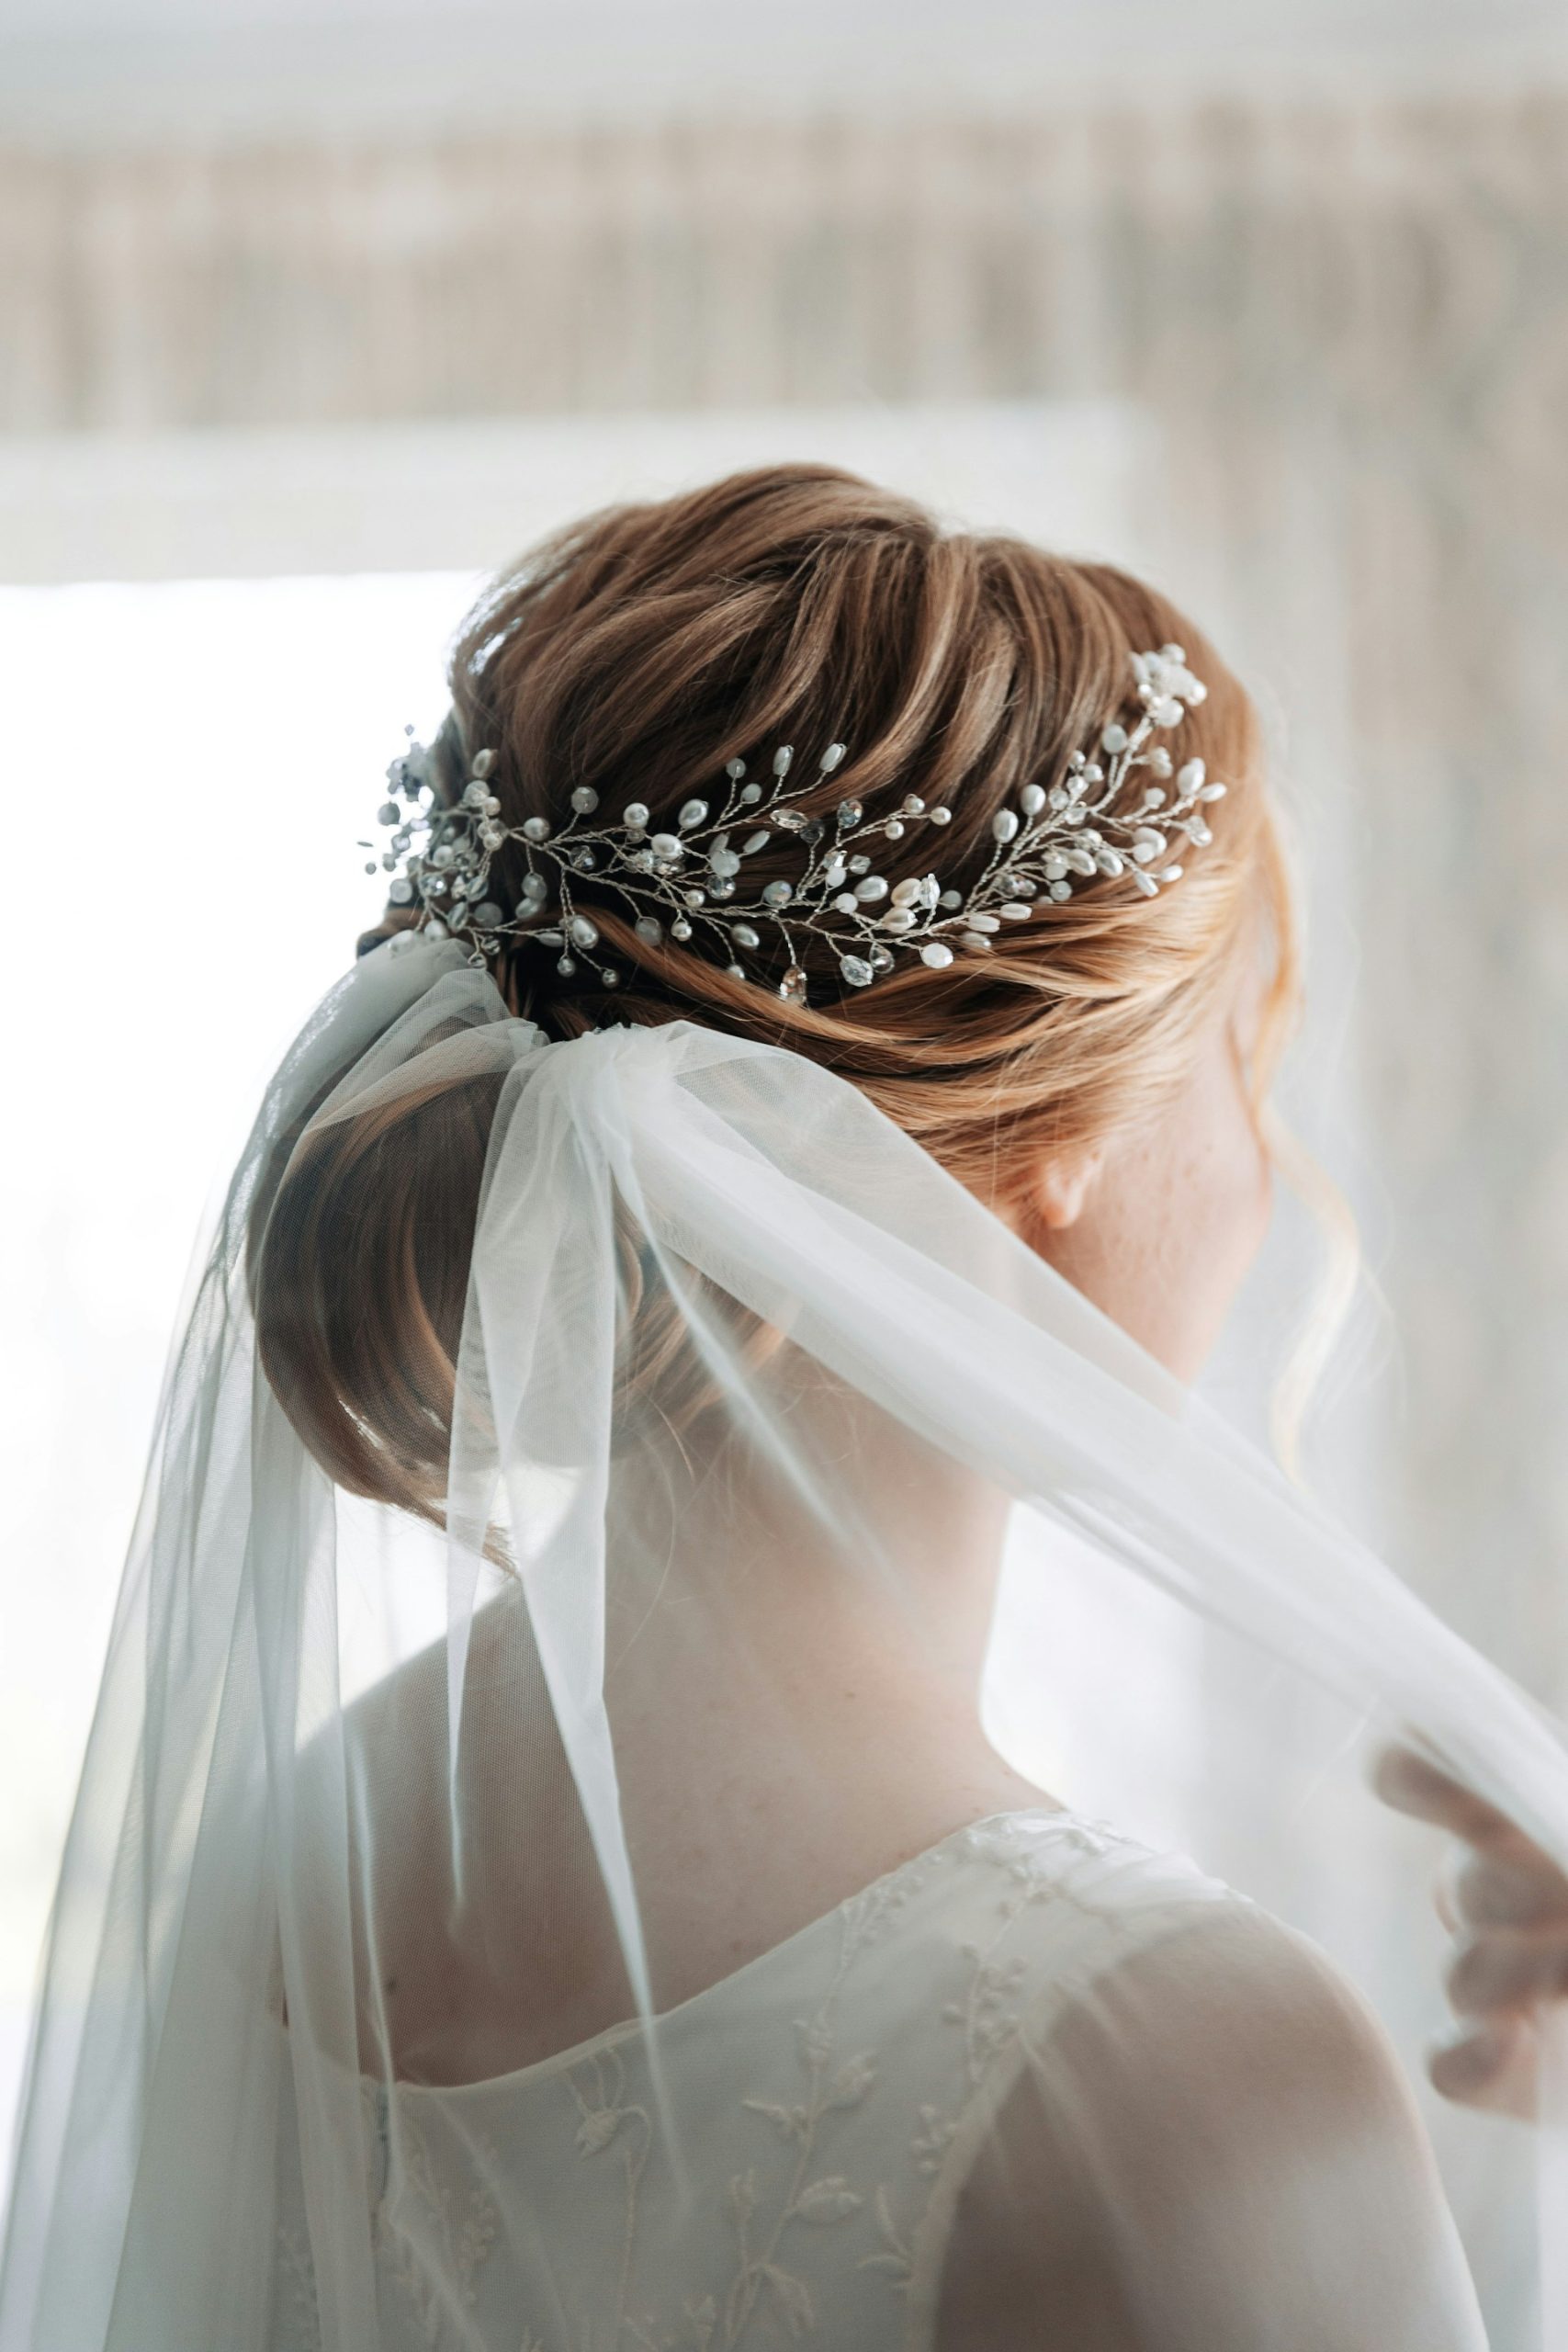 Bride with elegant updo and pearl hair accessory under sheer